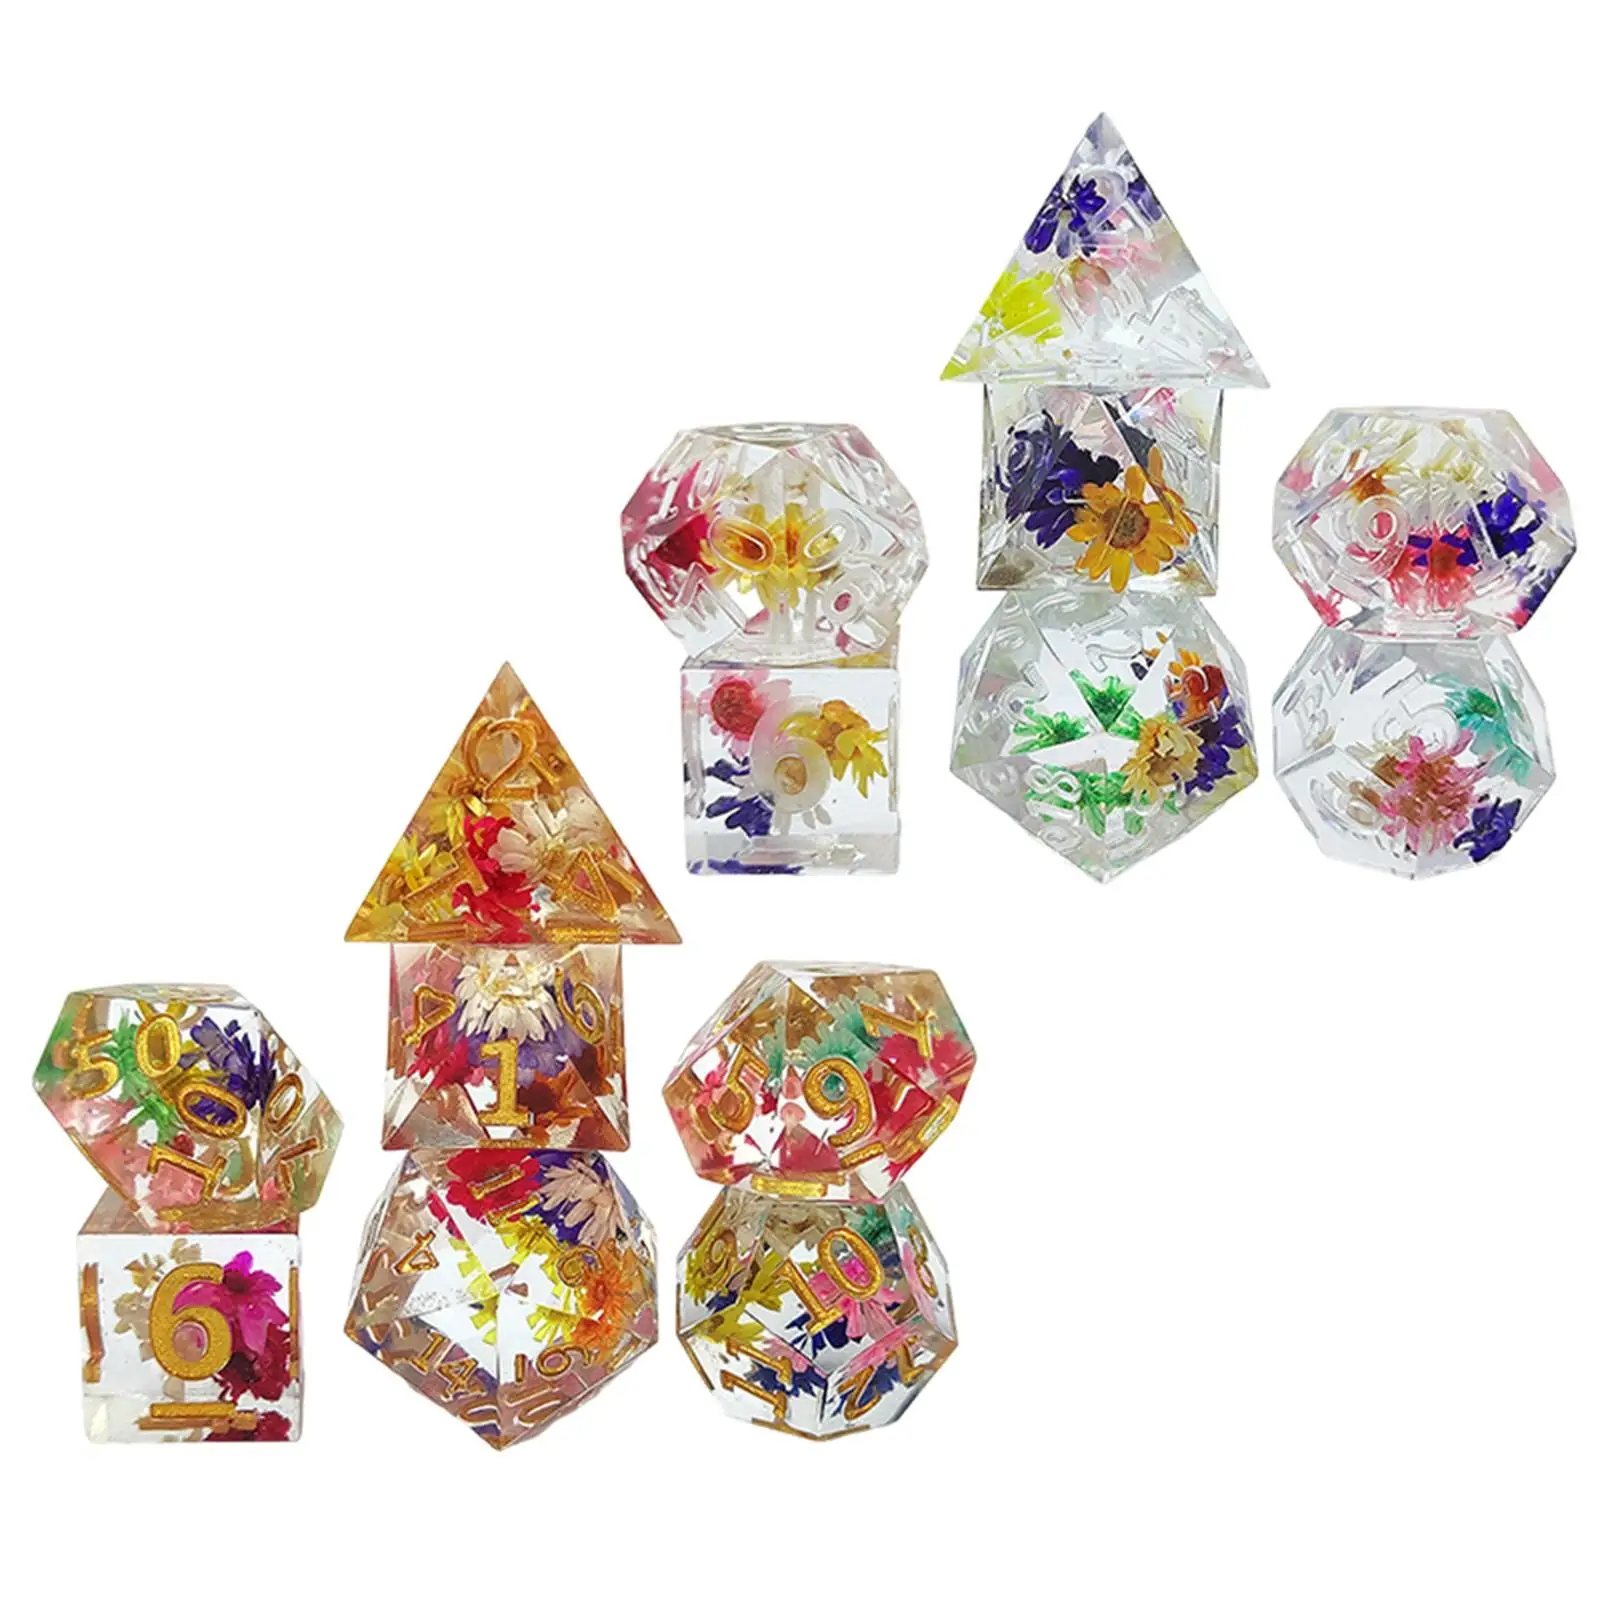 7pcs Multi Sided Dice Built-in Flower Pattern D4 D6 D8 2xd10 D12 D20 For Dnd Rpg Board Games Accessories Role Playing Bulk